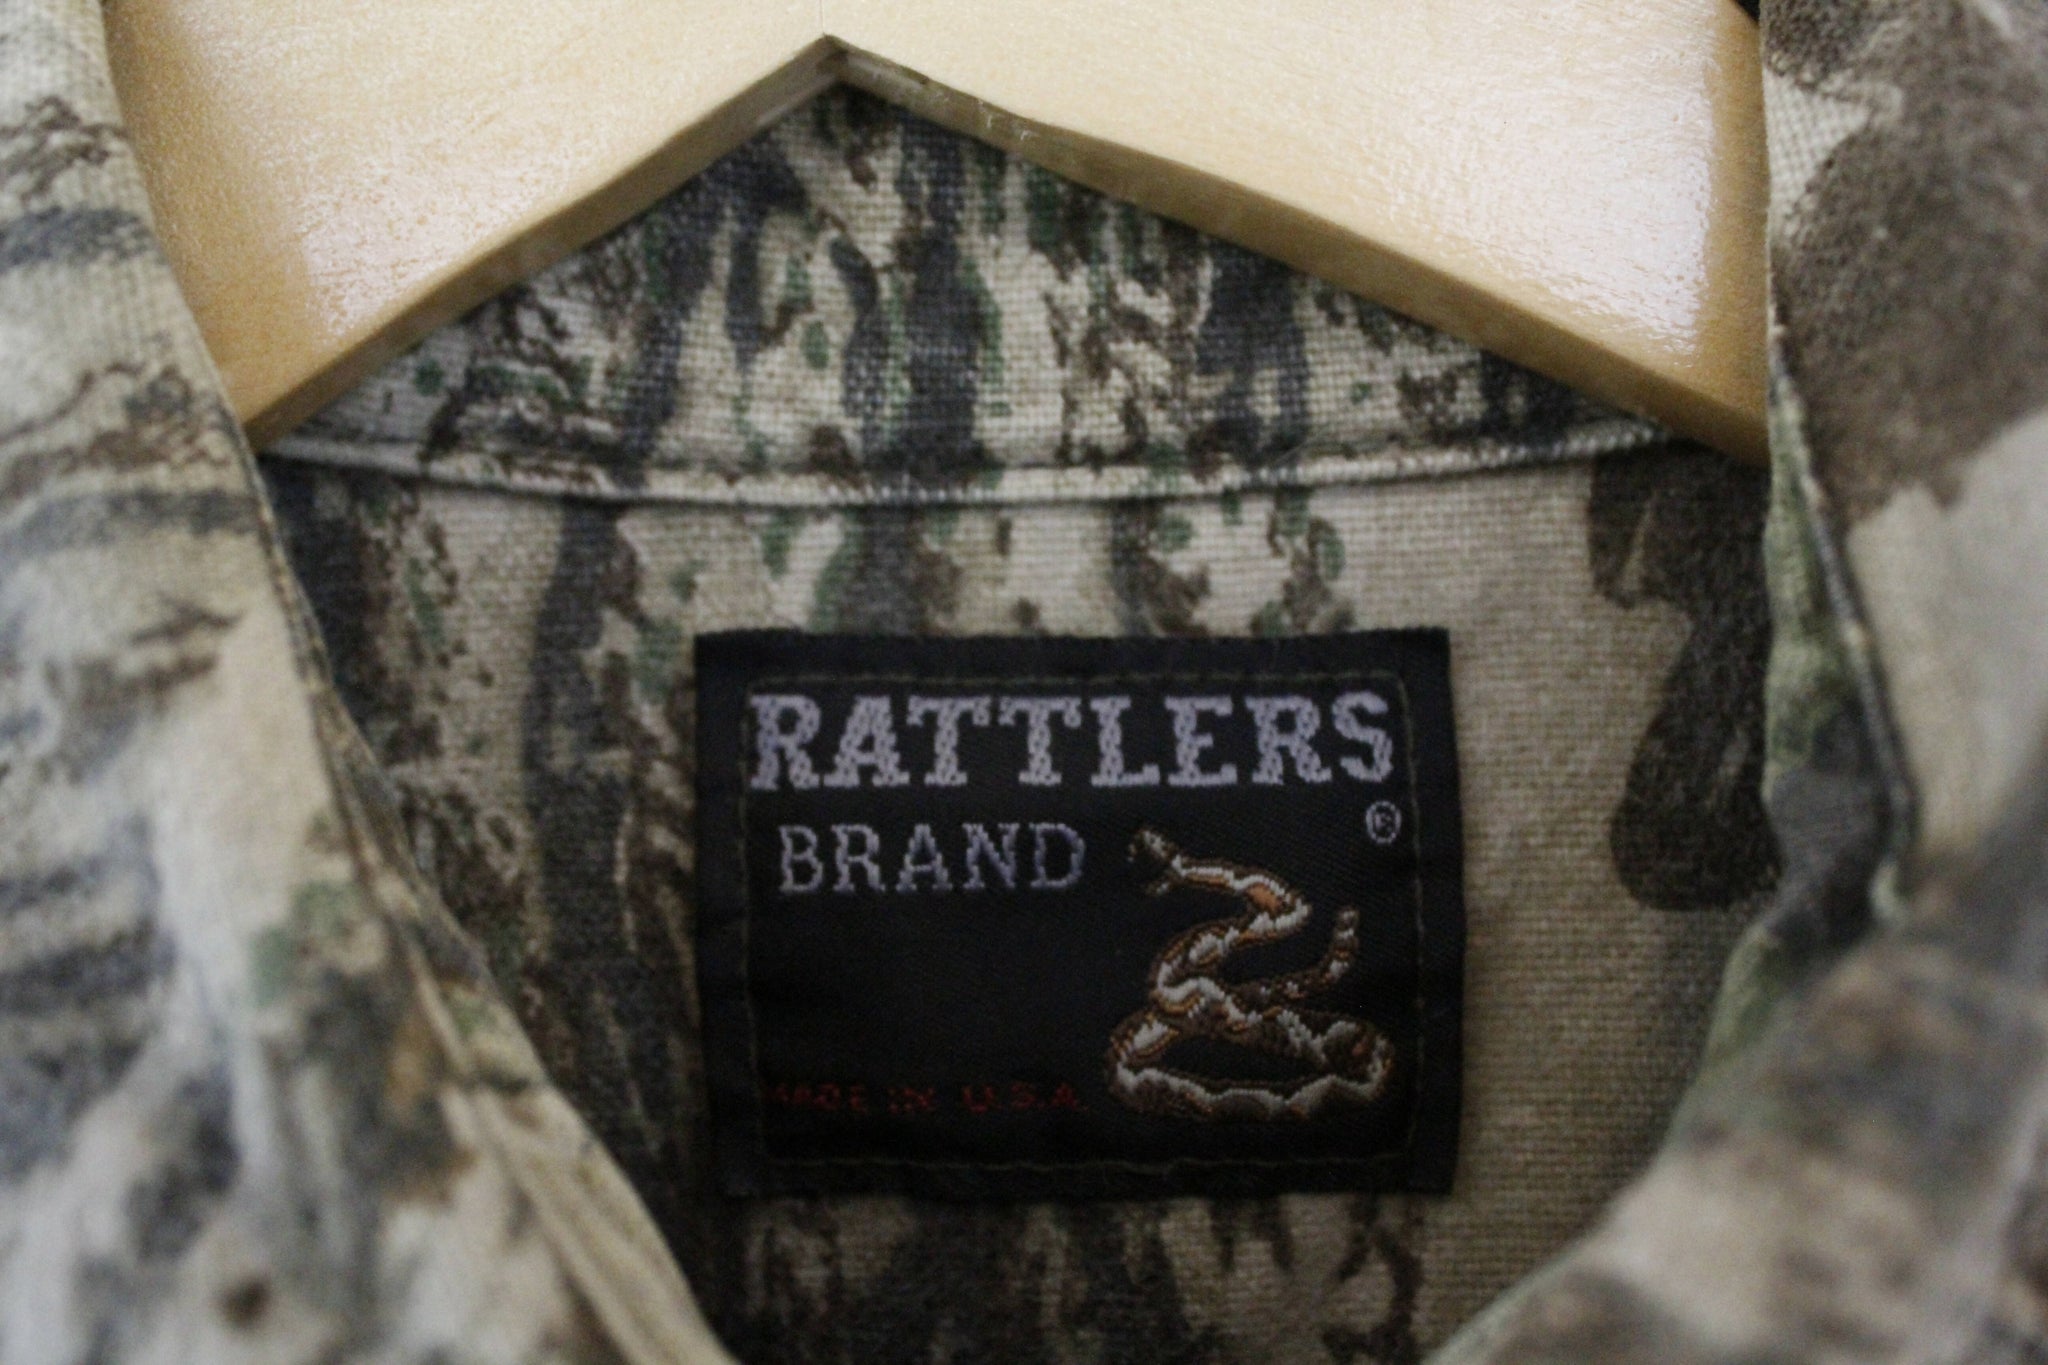 Vintage Rattlers Brand Realtree Camo Men's Button Up Front Shirt XL